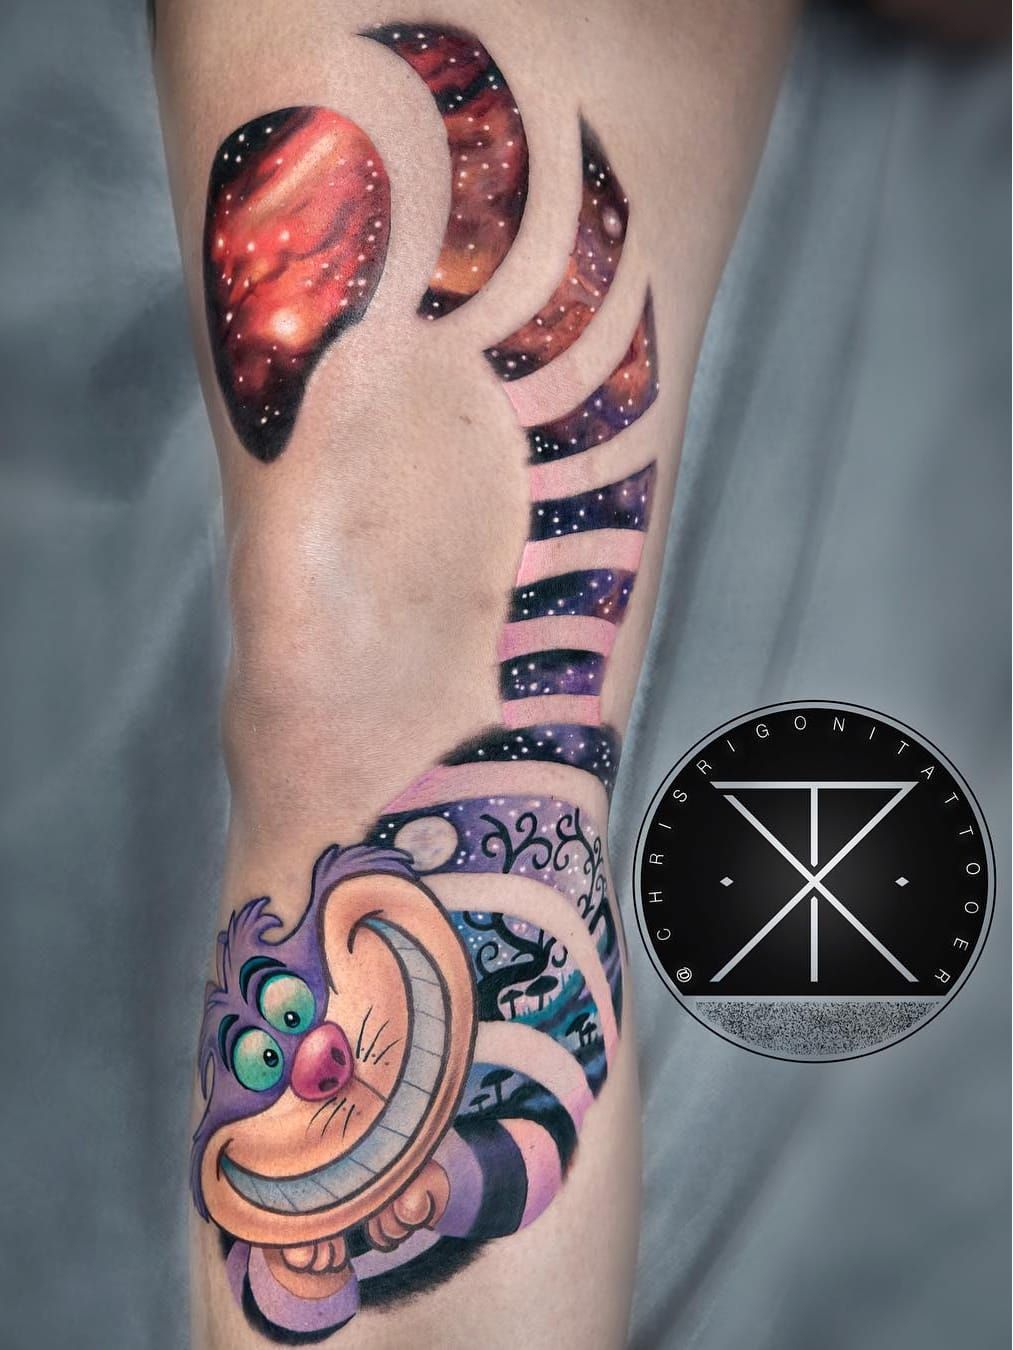 Mythical Tattoo Ideas for Fantasy Fiction Fans  Unicorn tattoos Girly  tattoos Fantasy tattoos